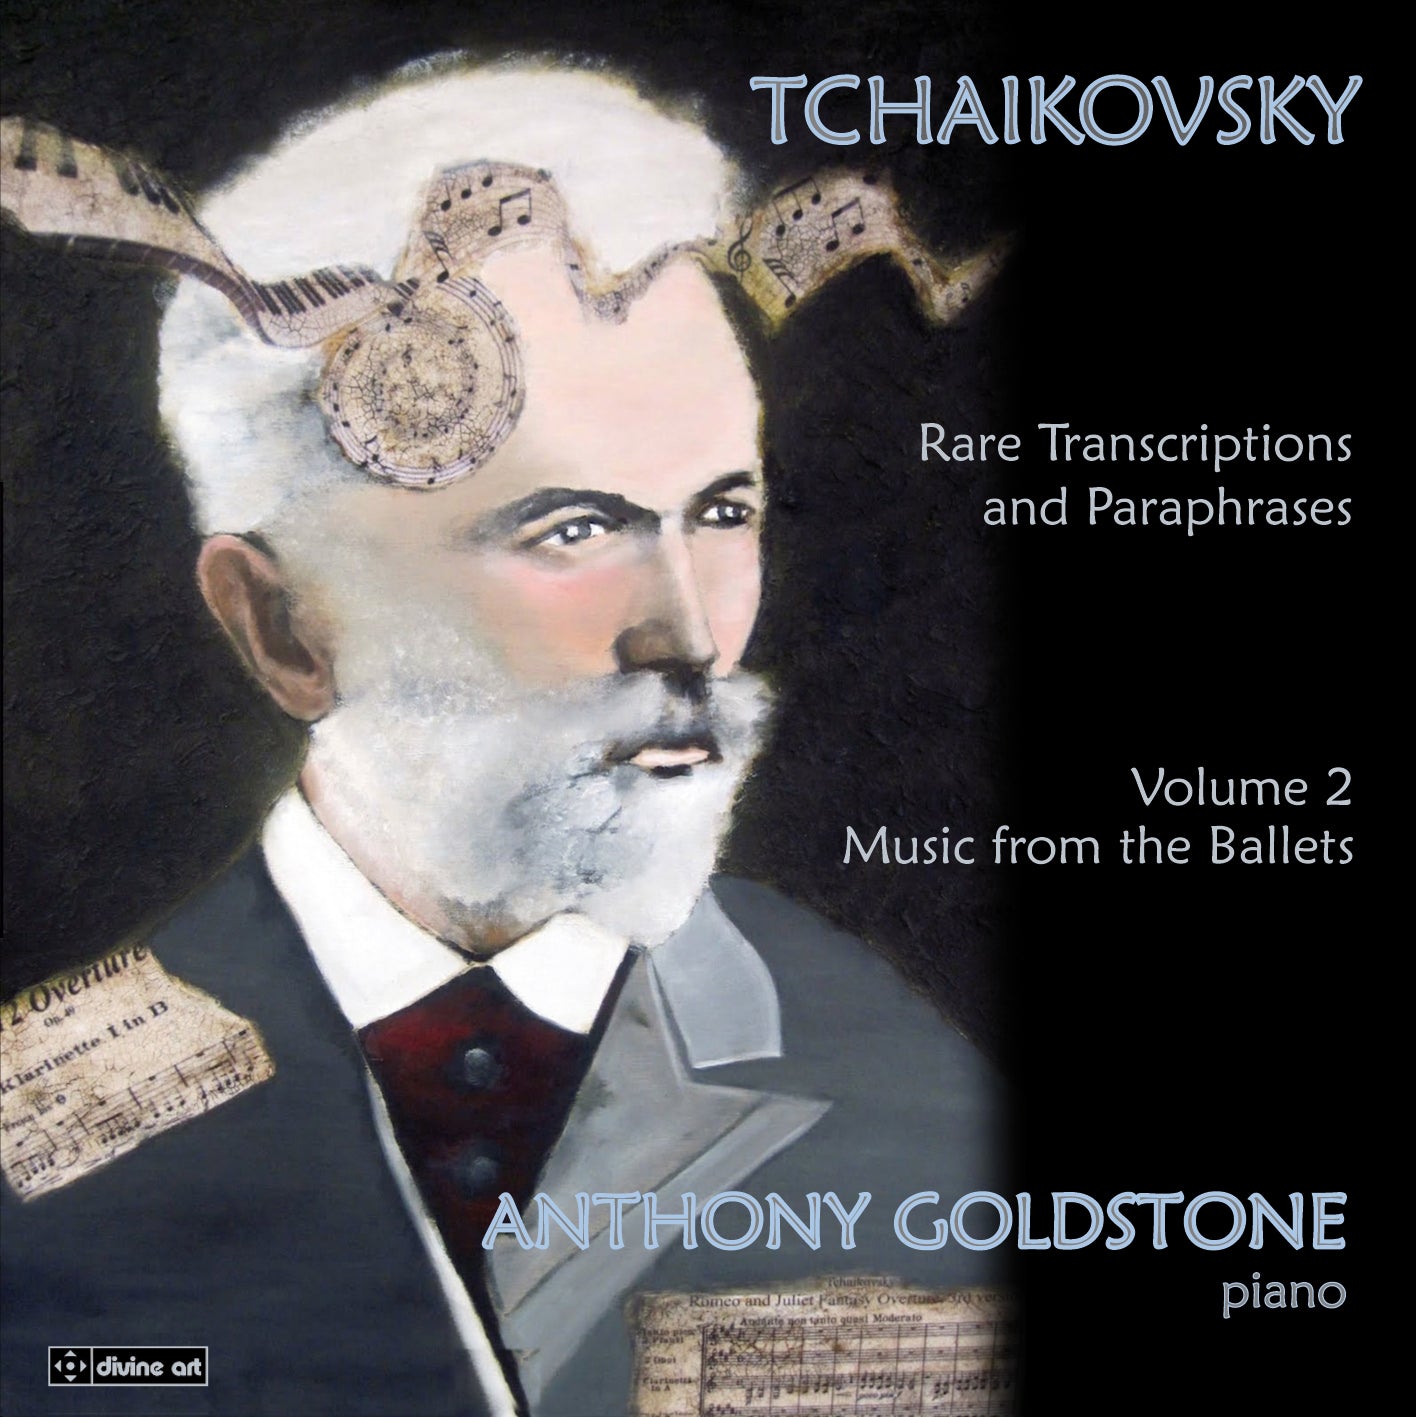 Tchaikovsky: Rare Transcriptions and Paraphrases (Music from the Ballets), Vol. 2 / Goldstone